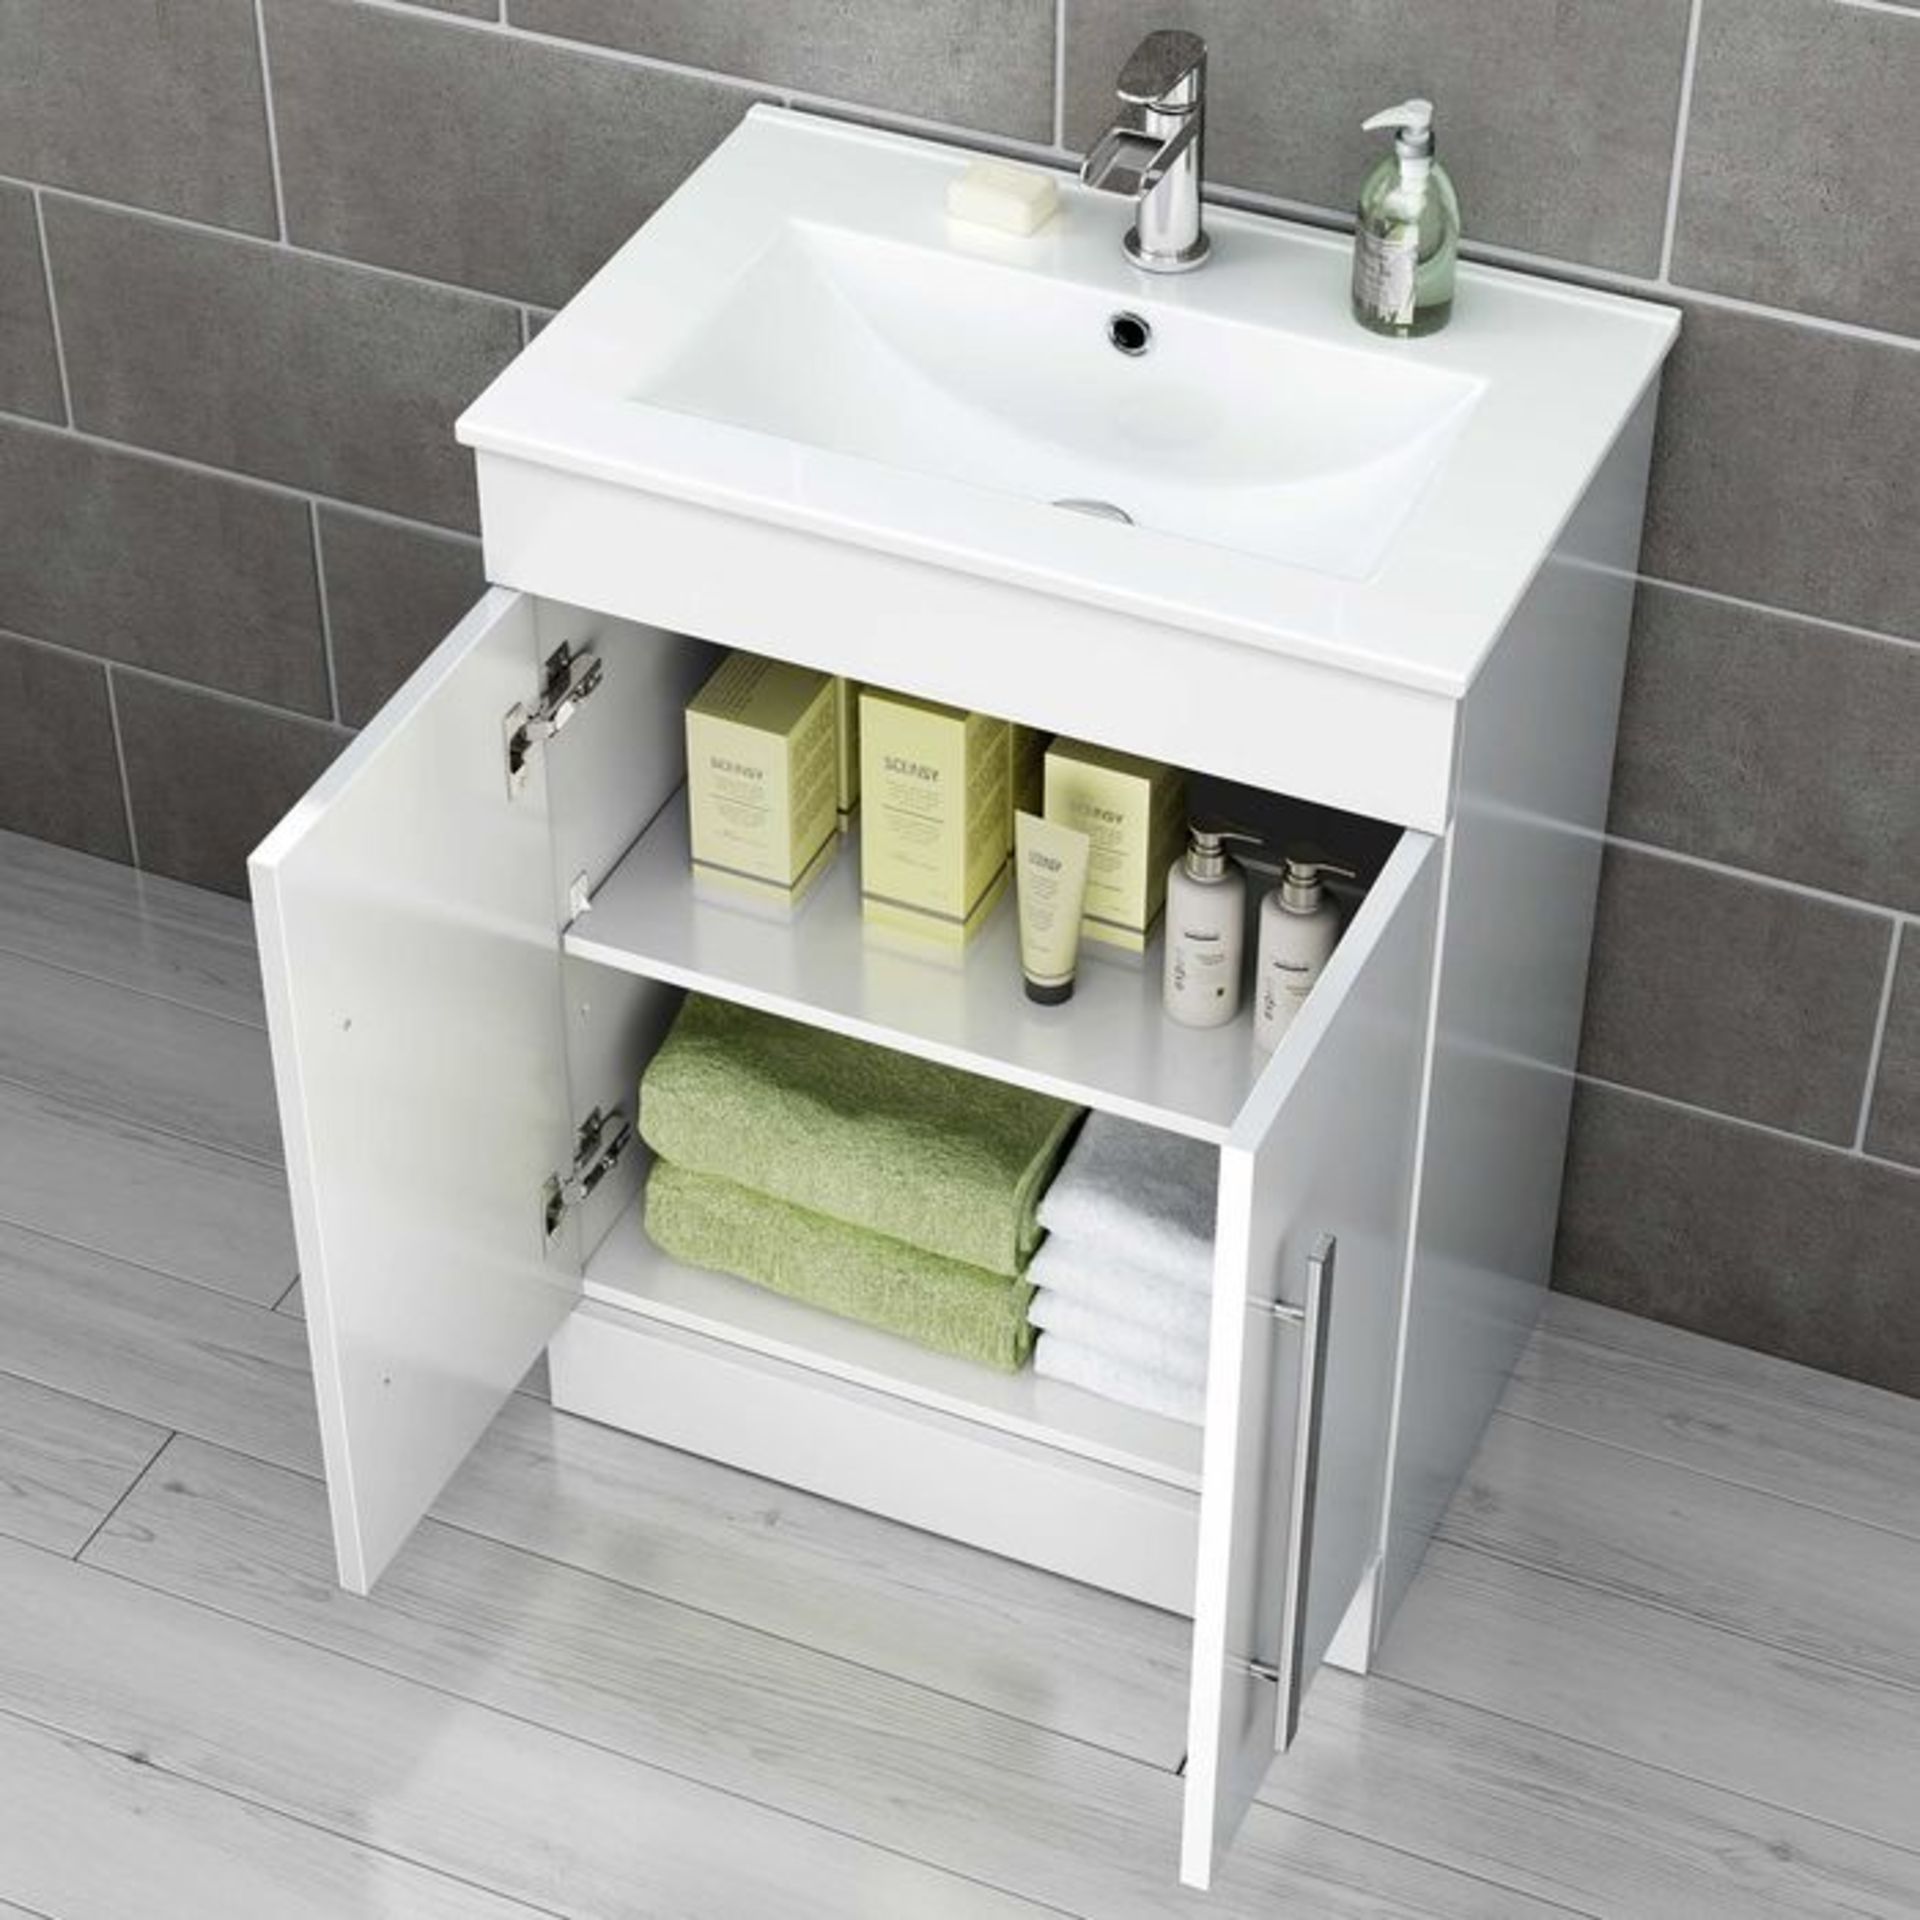 (AH27) 600mm Avon High Gloss White Basin Cabinet - Floor Standing. RRP £499.99. Comes complete - Image 2 of 4